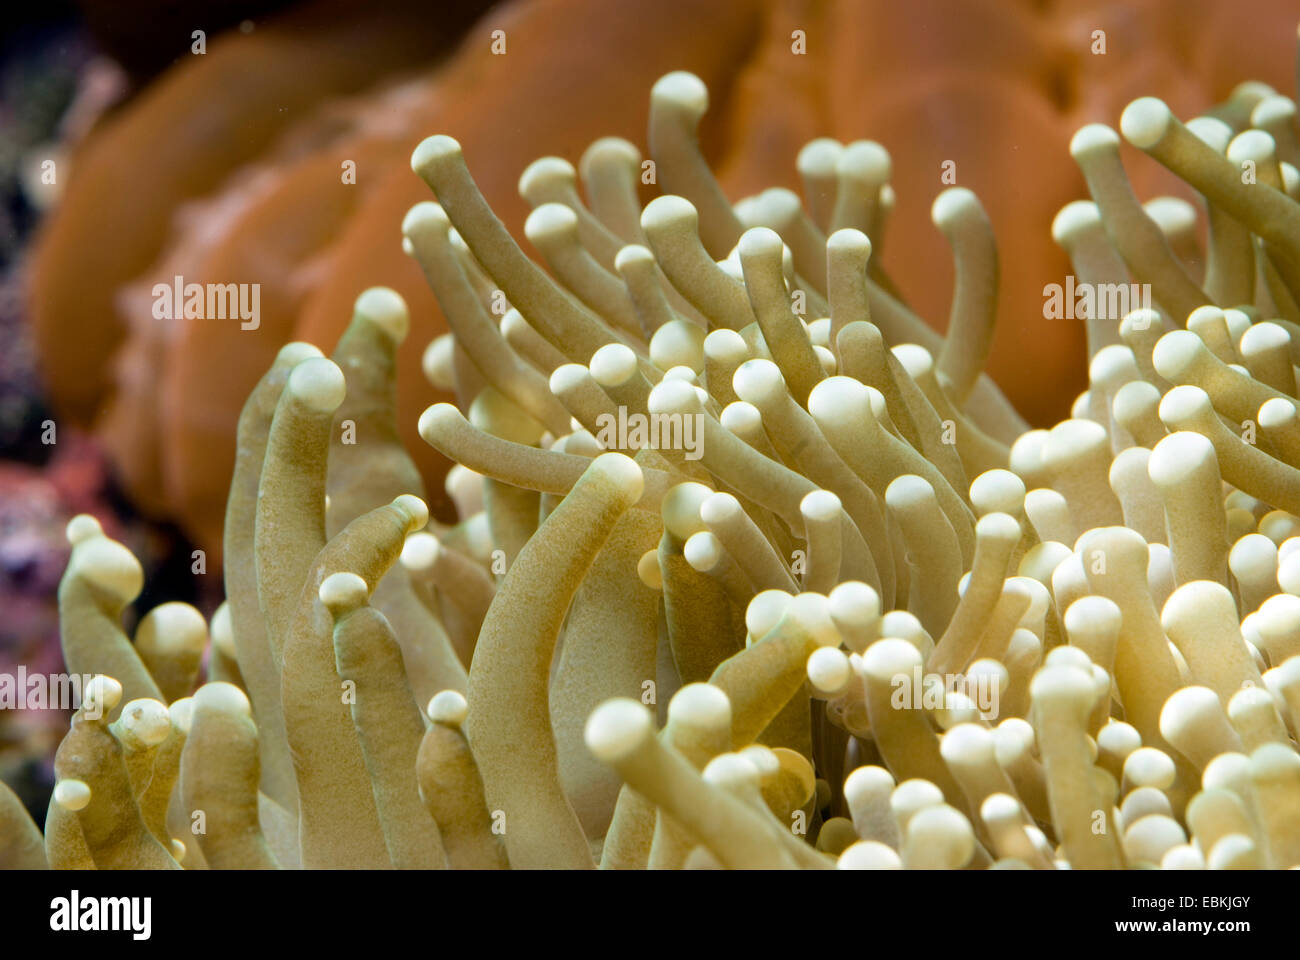 Corail Euphyllia glabrescens (flamme), close-up view Banque D'Images